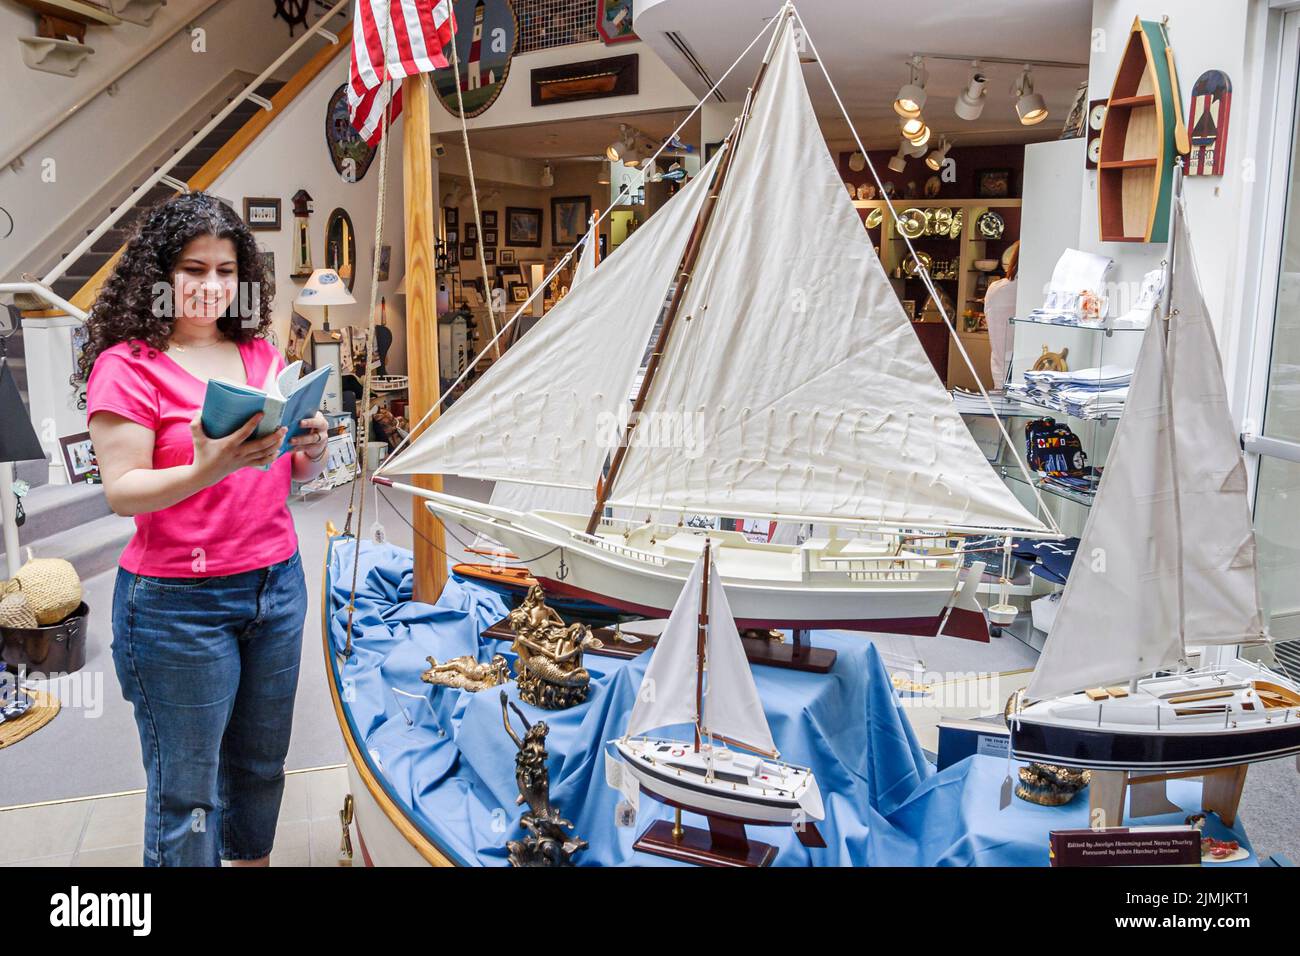 Newport News Virginia,Mariners' Museum and Park,history collection exhibits inside interior displays ship models sailboats woman visiting tourist Stock Photo